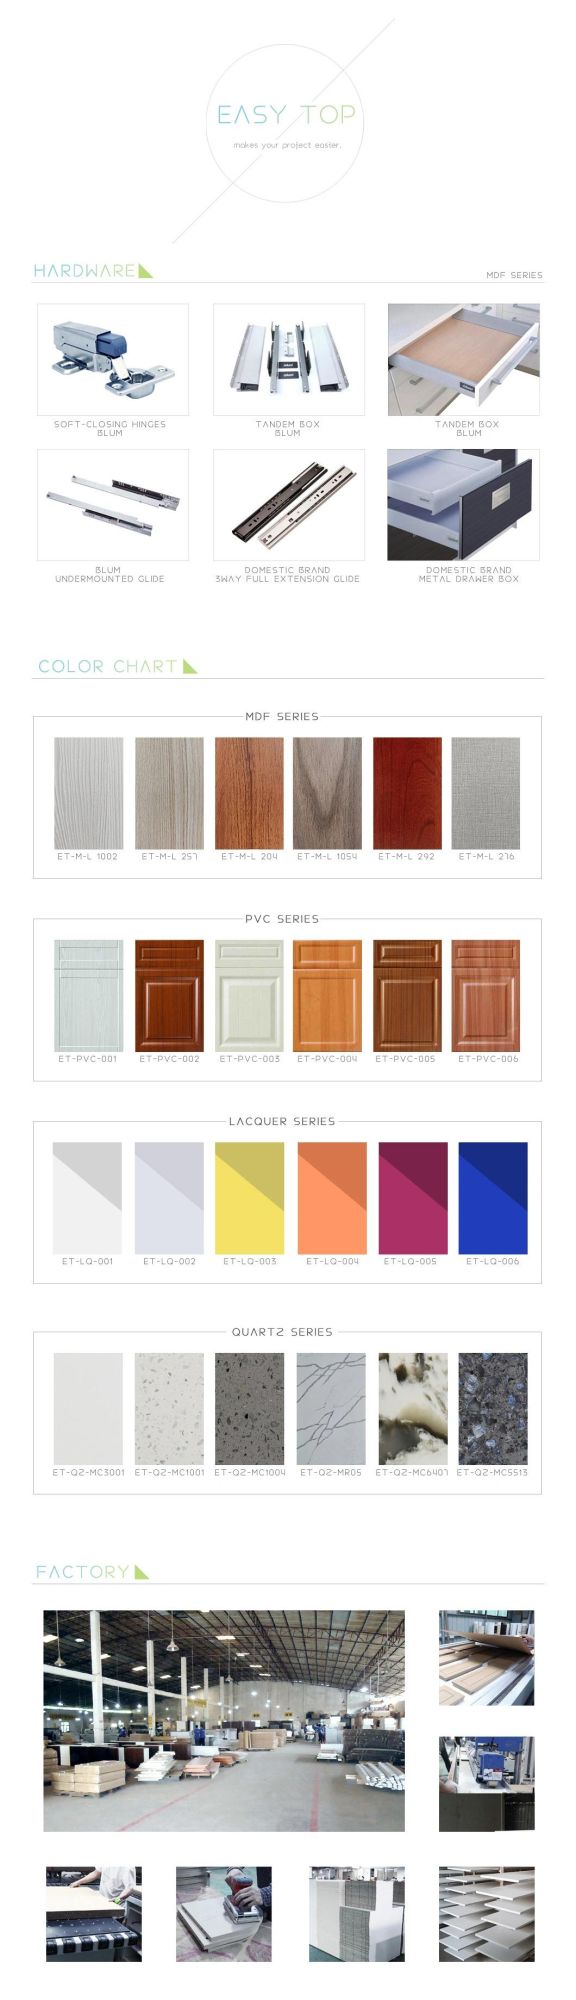 Guangzhou Manufacturer Affordable Price MDF Door Panel Lacquer Design Kitchen Cabinet